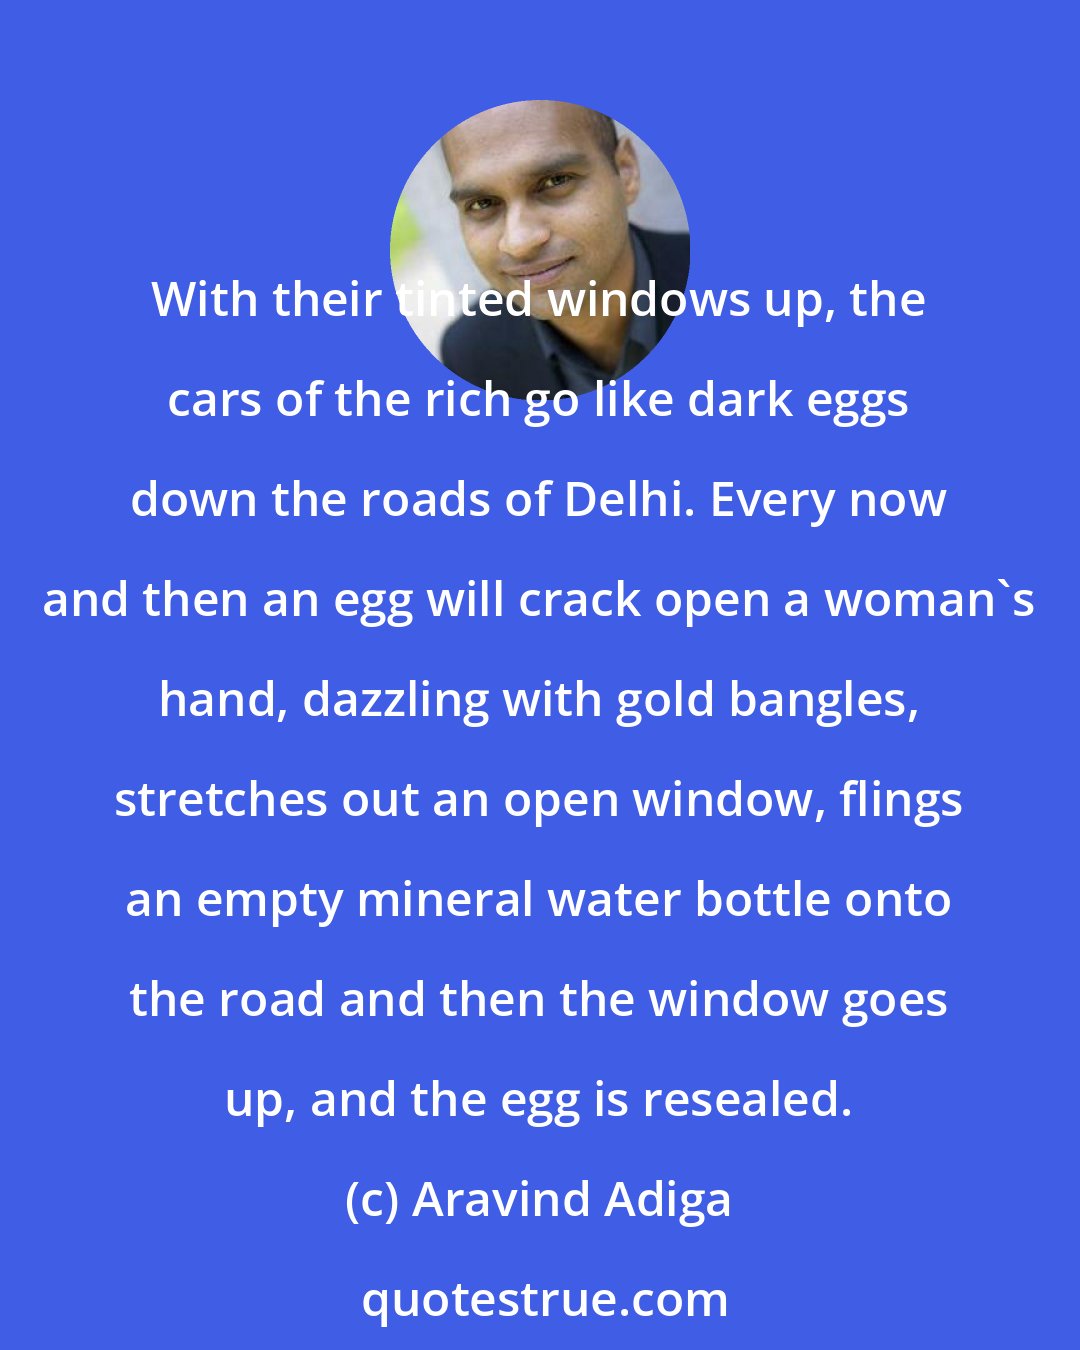 Aravind Adiga: With their tinted windows up, the cars of the rich go like dark eggs down the roads of Delhi. Every now and then an egg will crack open a woman's hand, dazzling with gold bangles, stretches out an open window, flings an empty mineral water bottle onto the road and then the window goes up, and the egg is resealed.